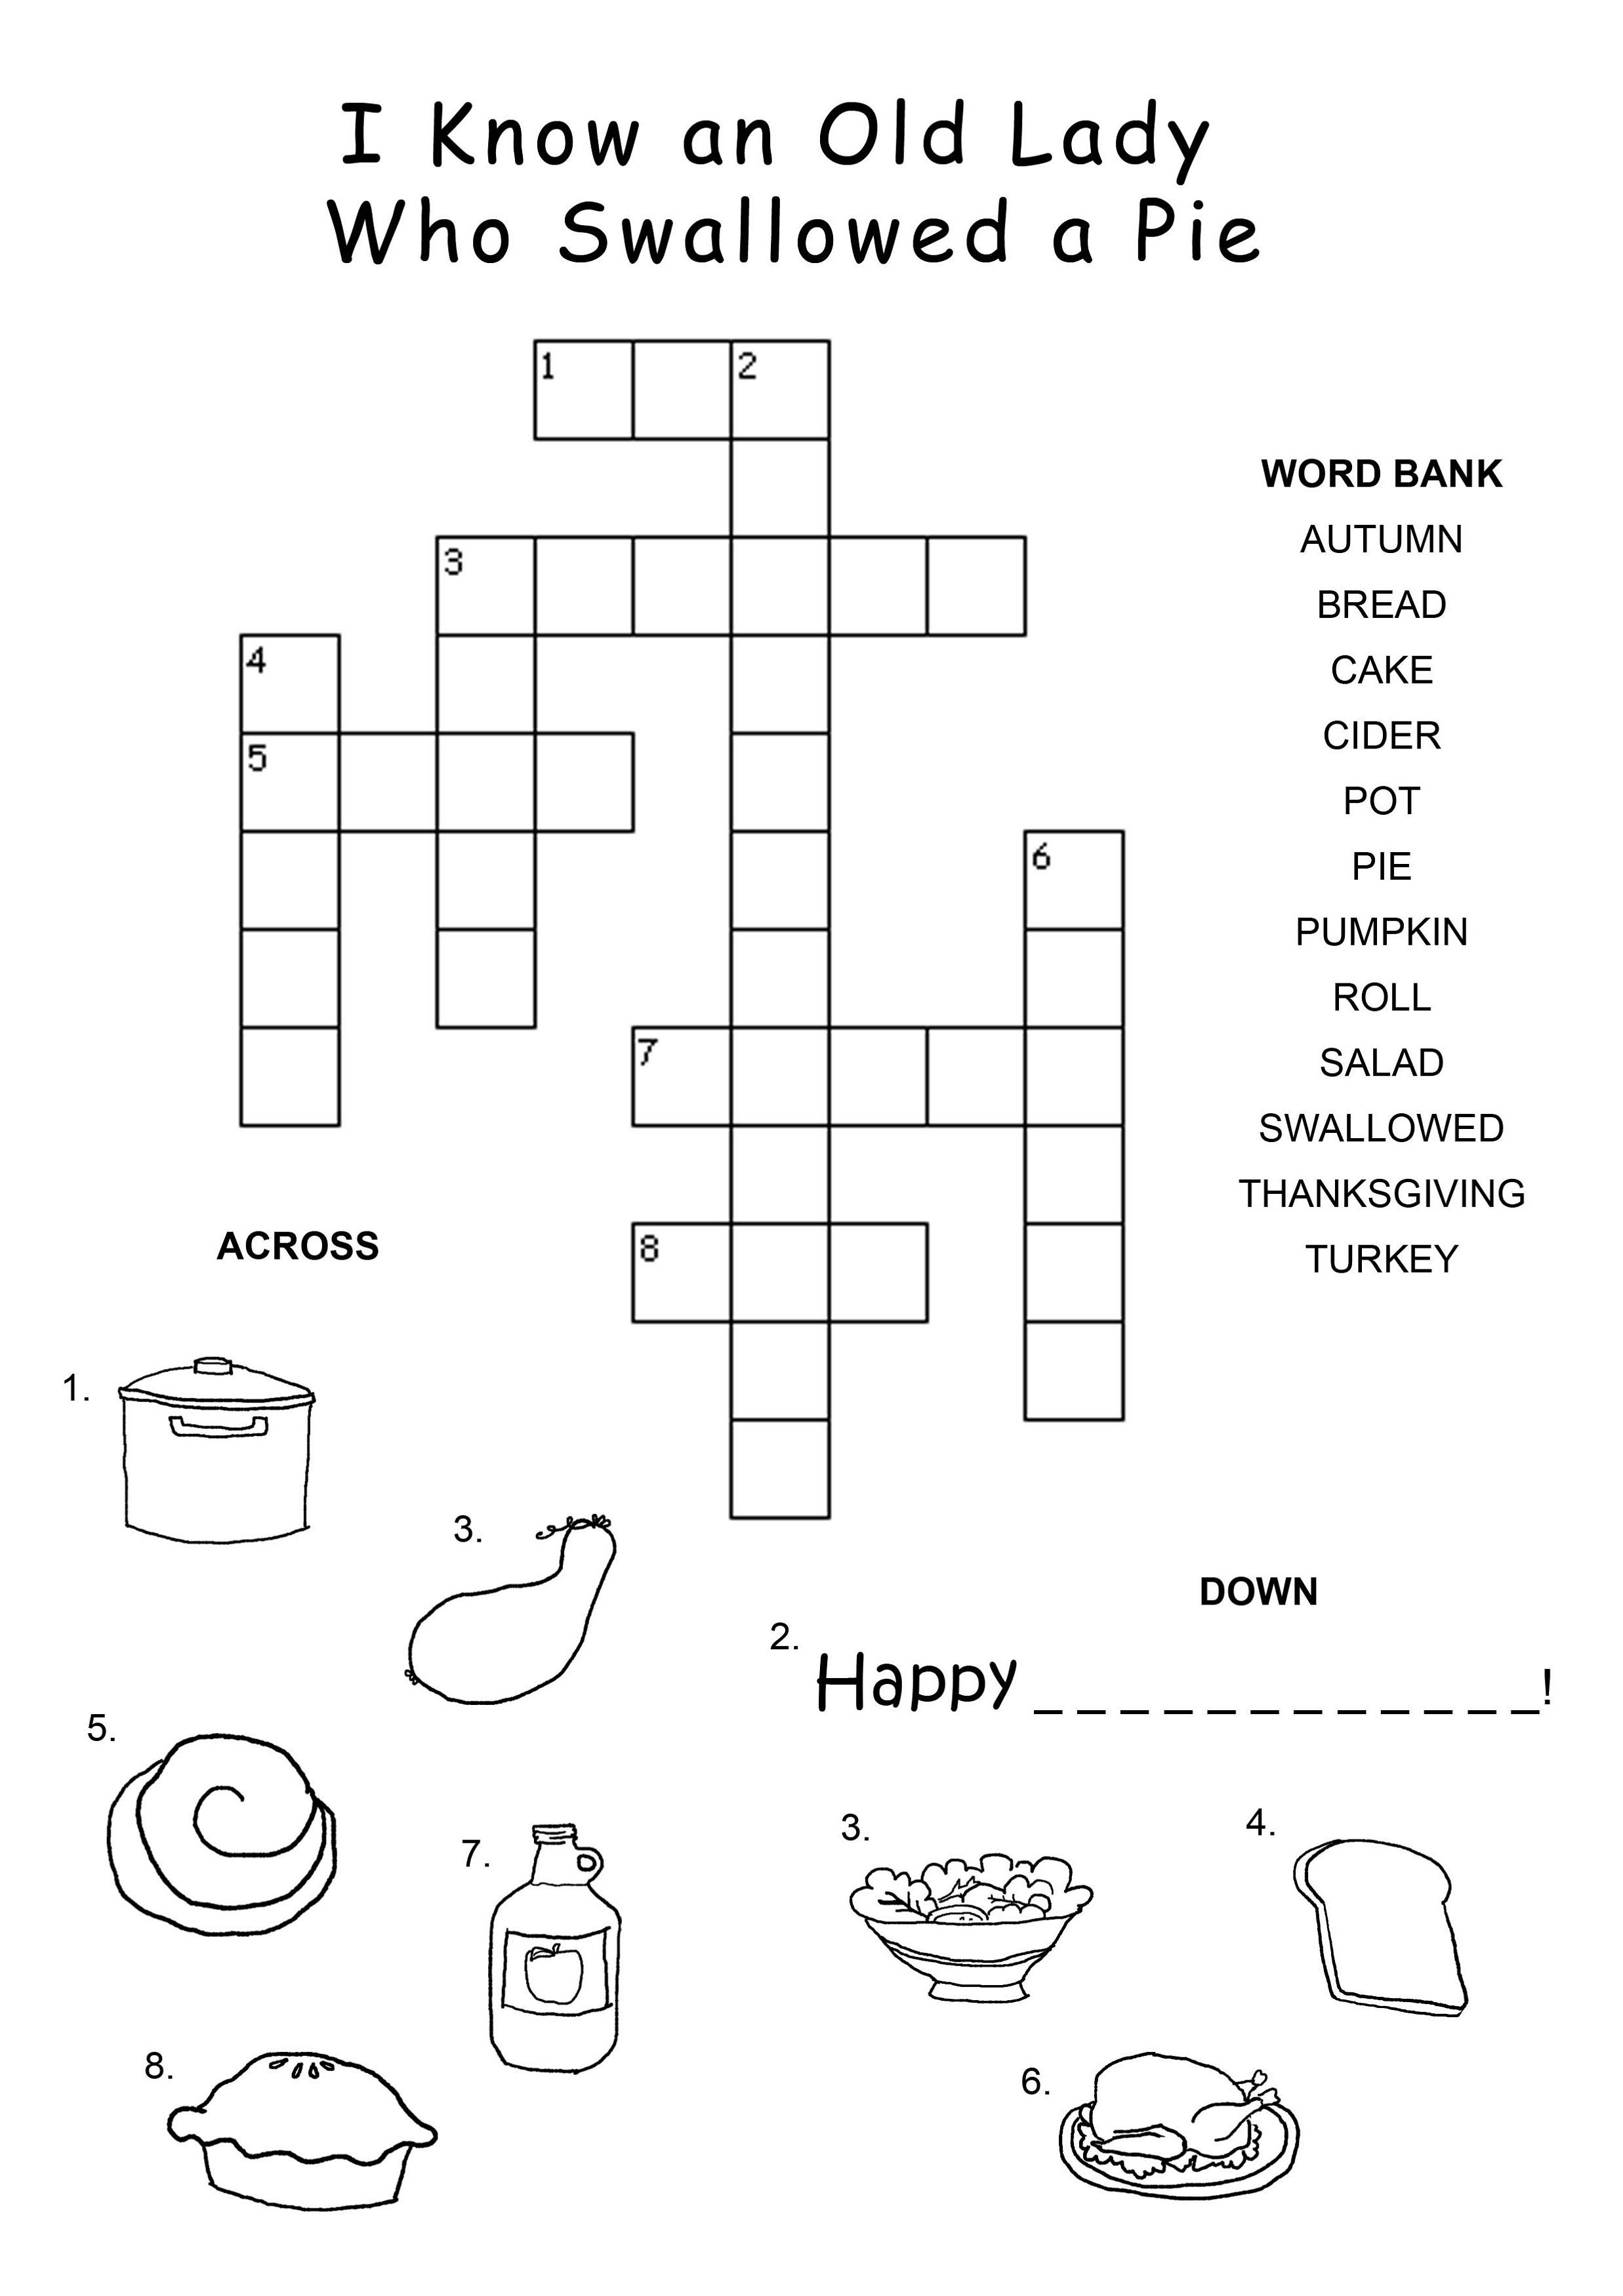 Thanksgiving Crossword Puzzle - Best Coloring Pages For Kids - Printable Thanksgiving Crossword Puzzles